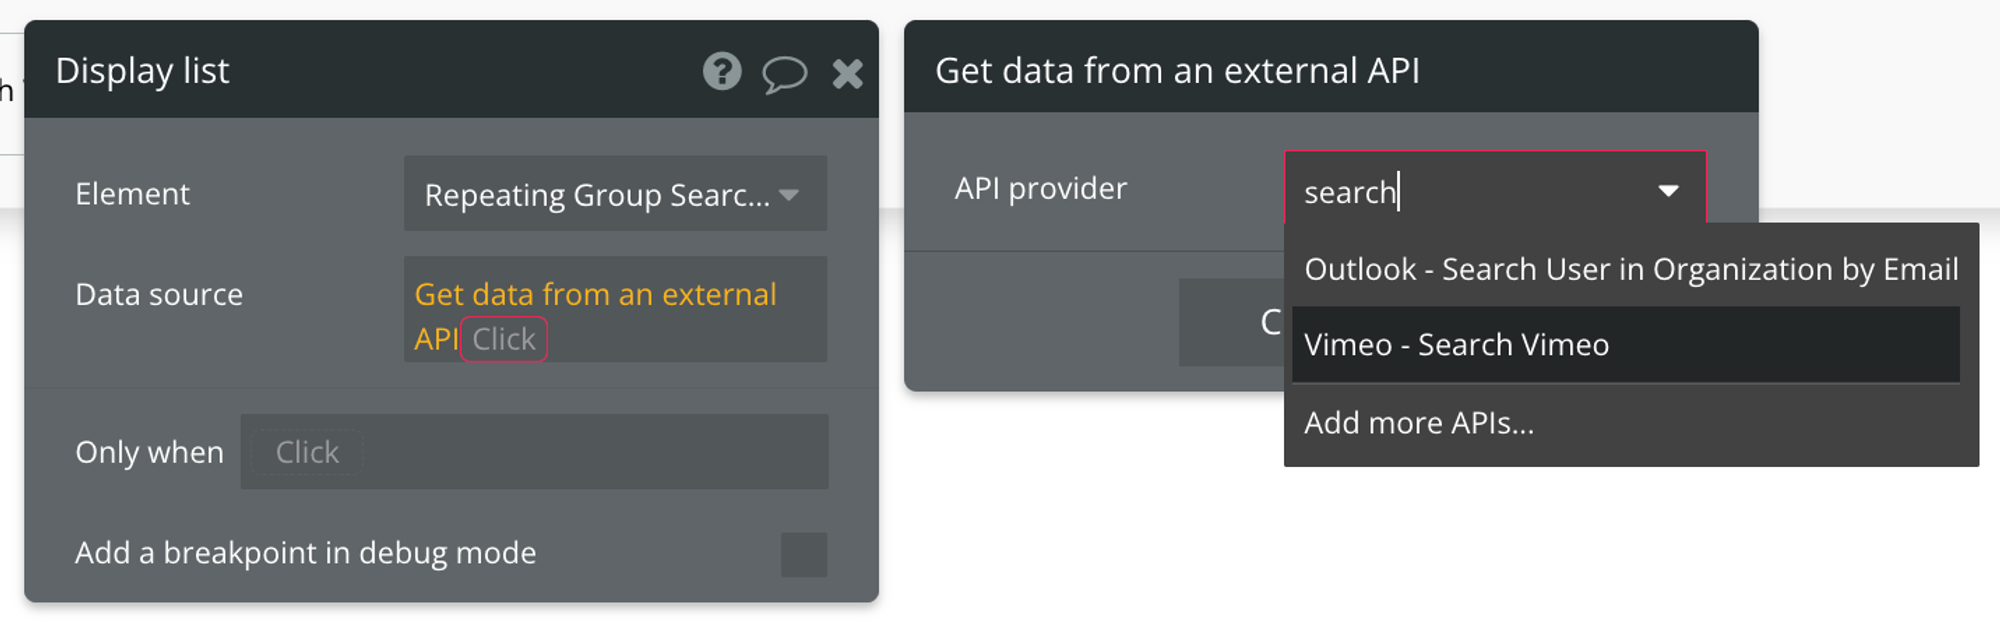 Select "Get data from external API" from the list of data sources, then find Vimeo - Search Vimeo from the list of API providers